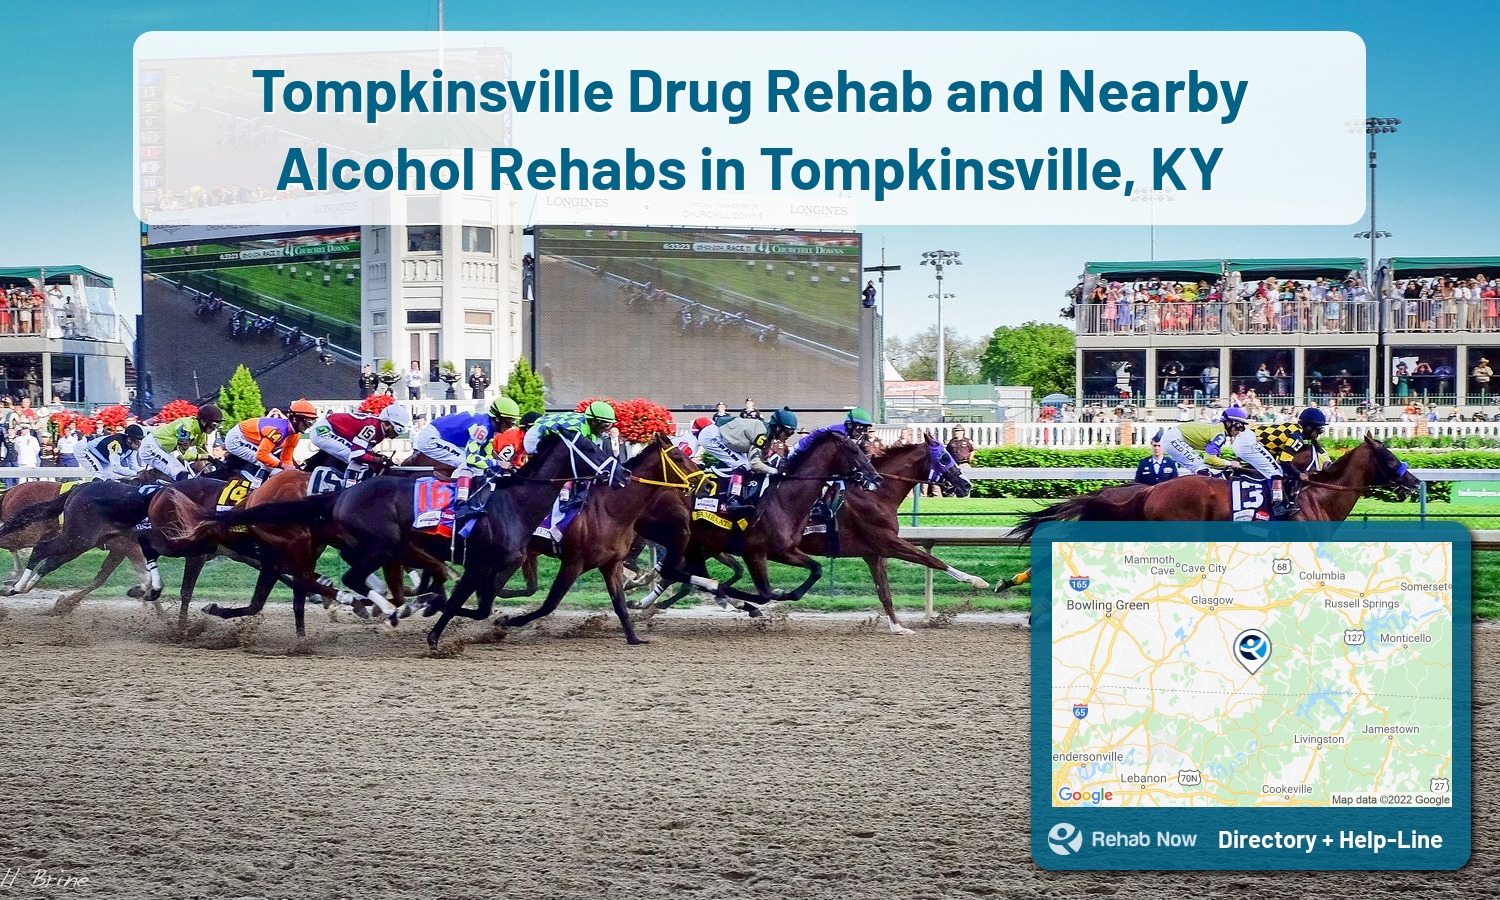 Our experts can help you find treatment now in Tompkinsville, Kentucky. We list drug rehab and alcohol centers in Kentucky.